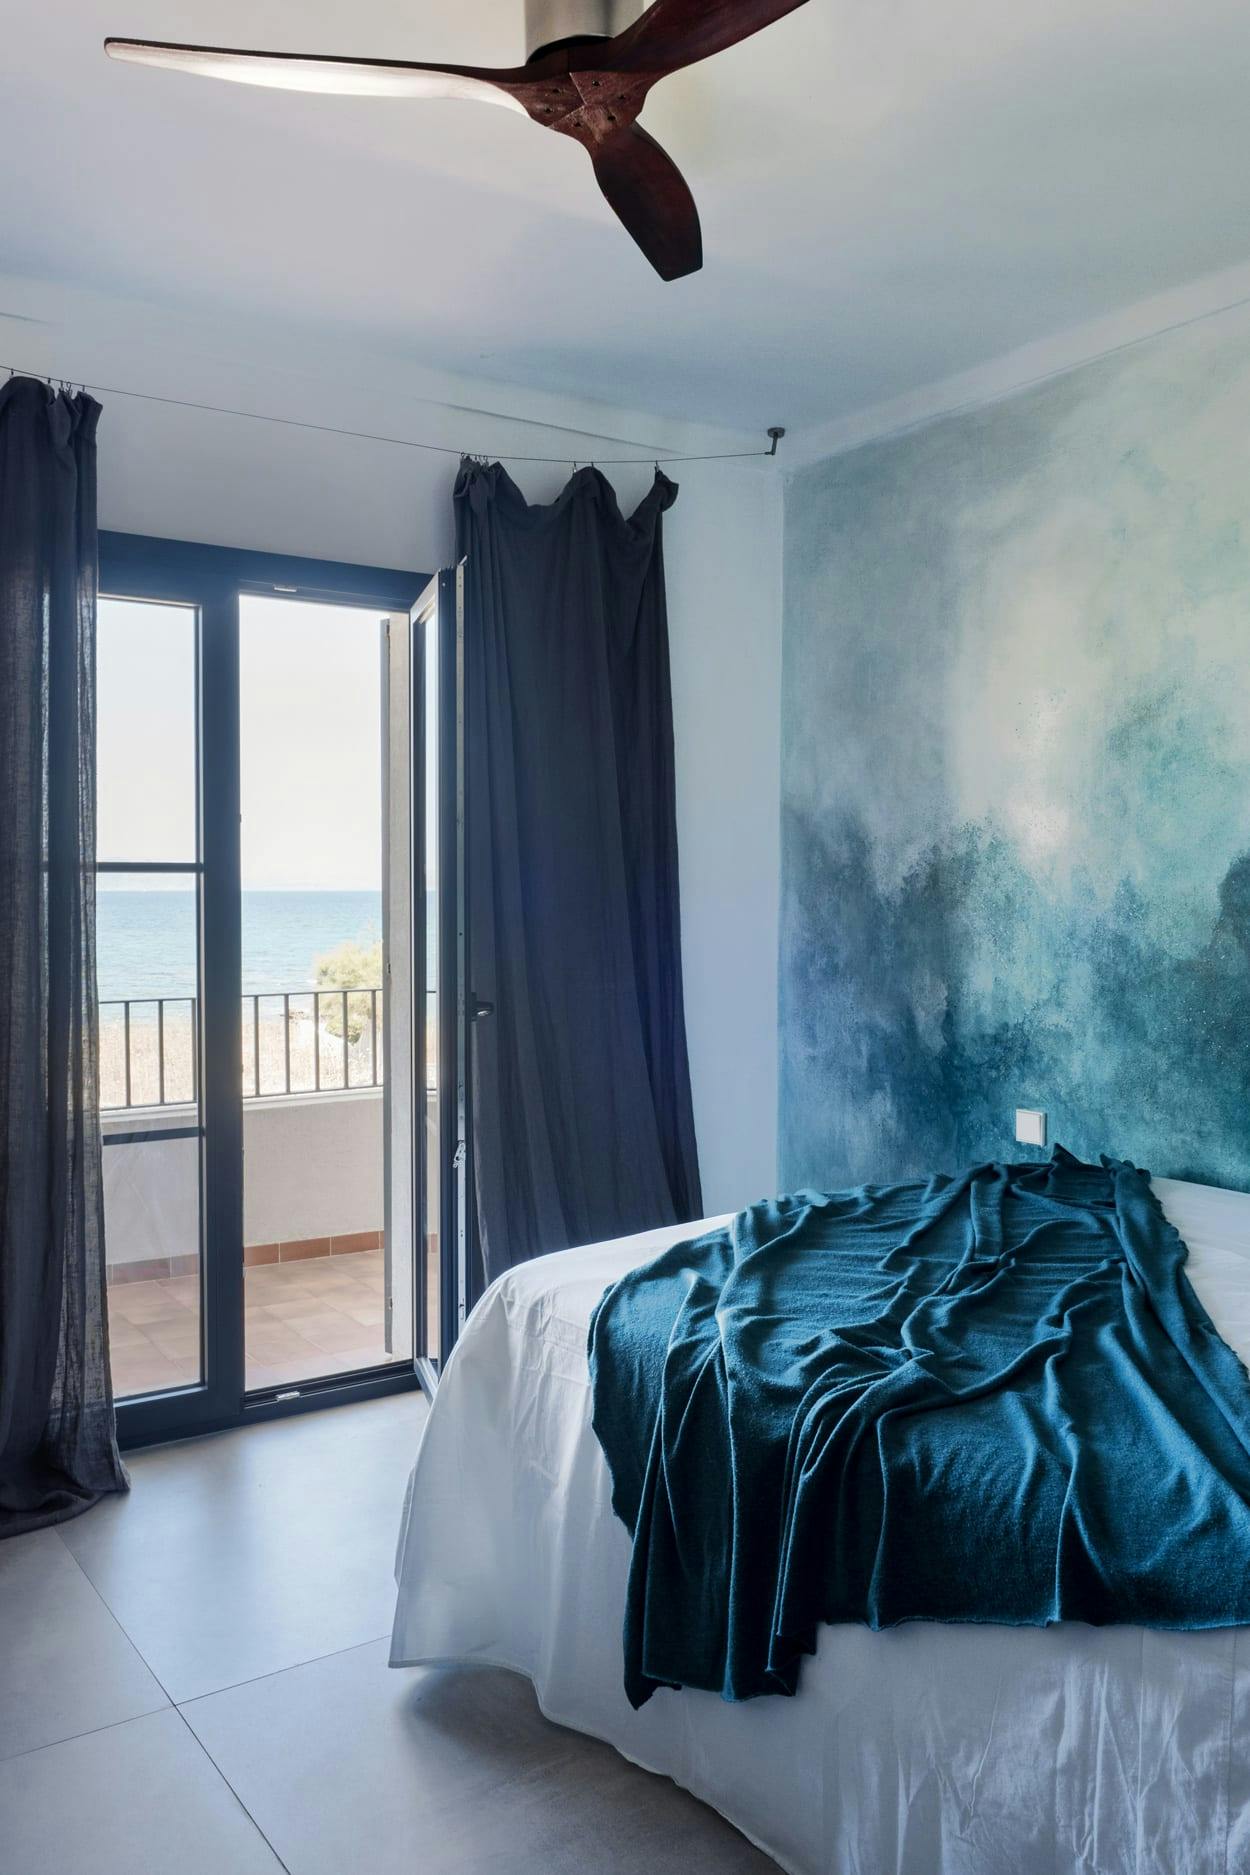 The image features a large bedroom with a neatly made bed, a large painting on the wall, and a ceiling fan.